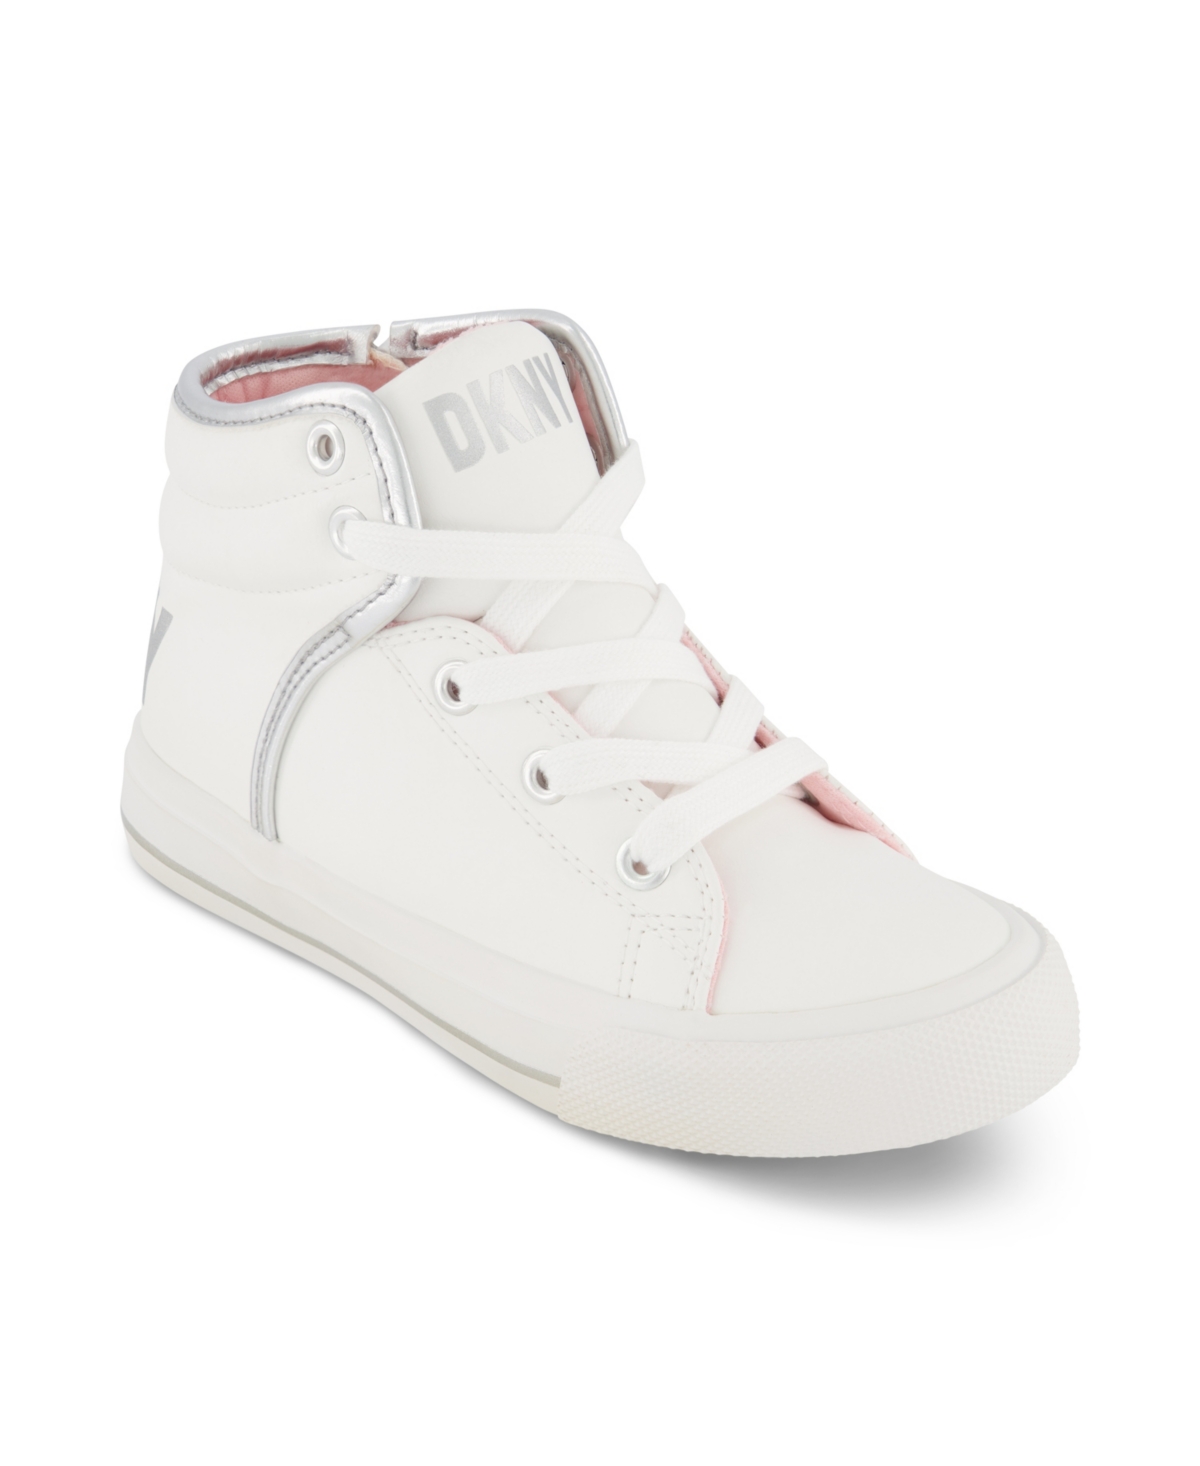 Shop Dkny Big Girls Fashion Athletic High Top Sneakers In White